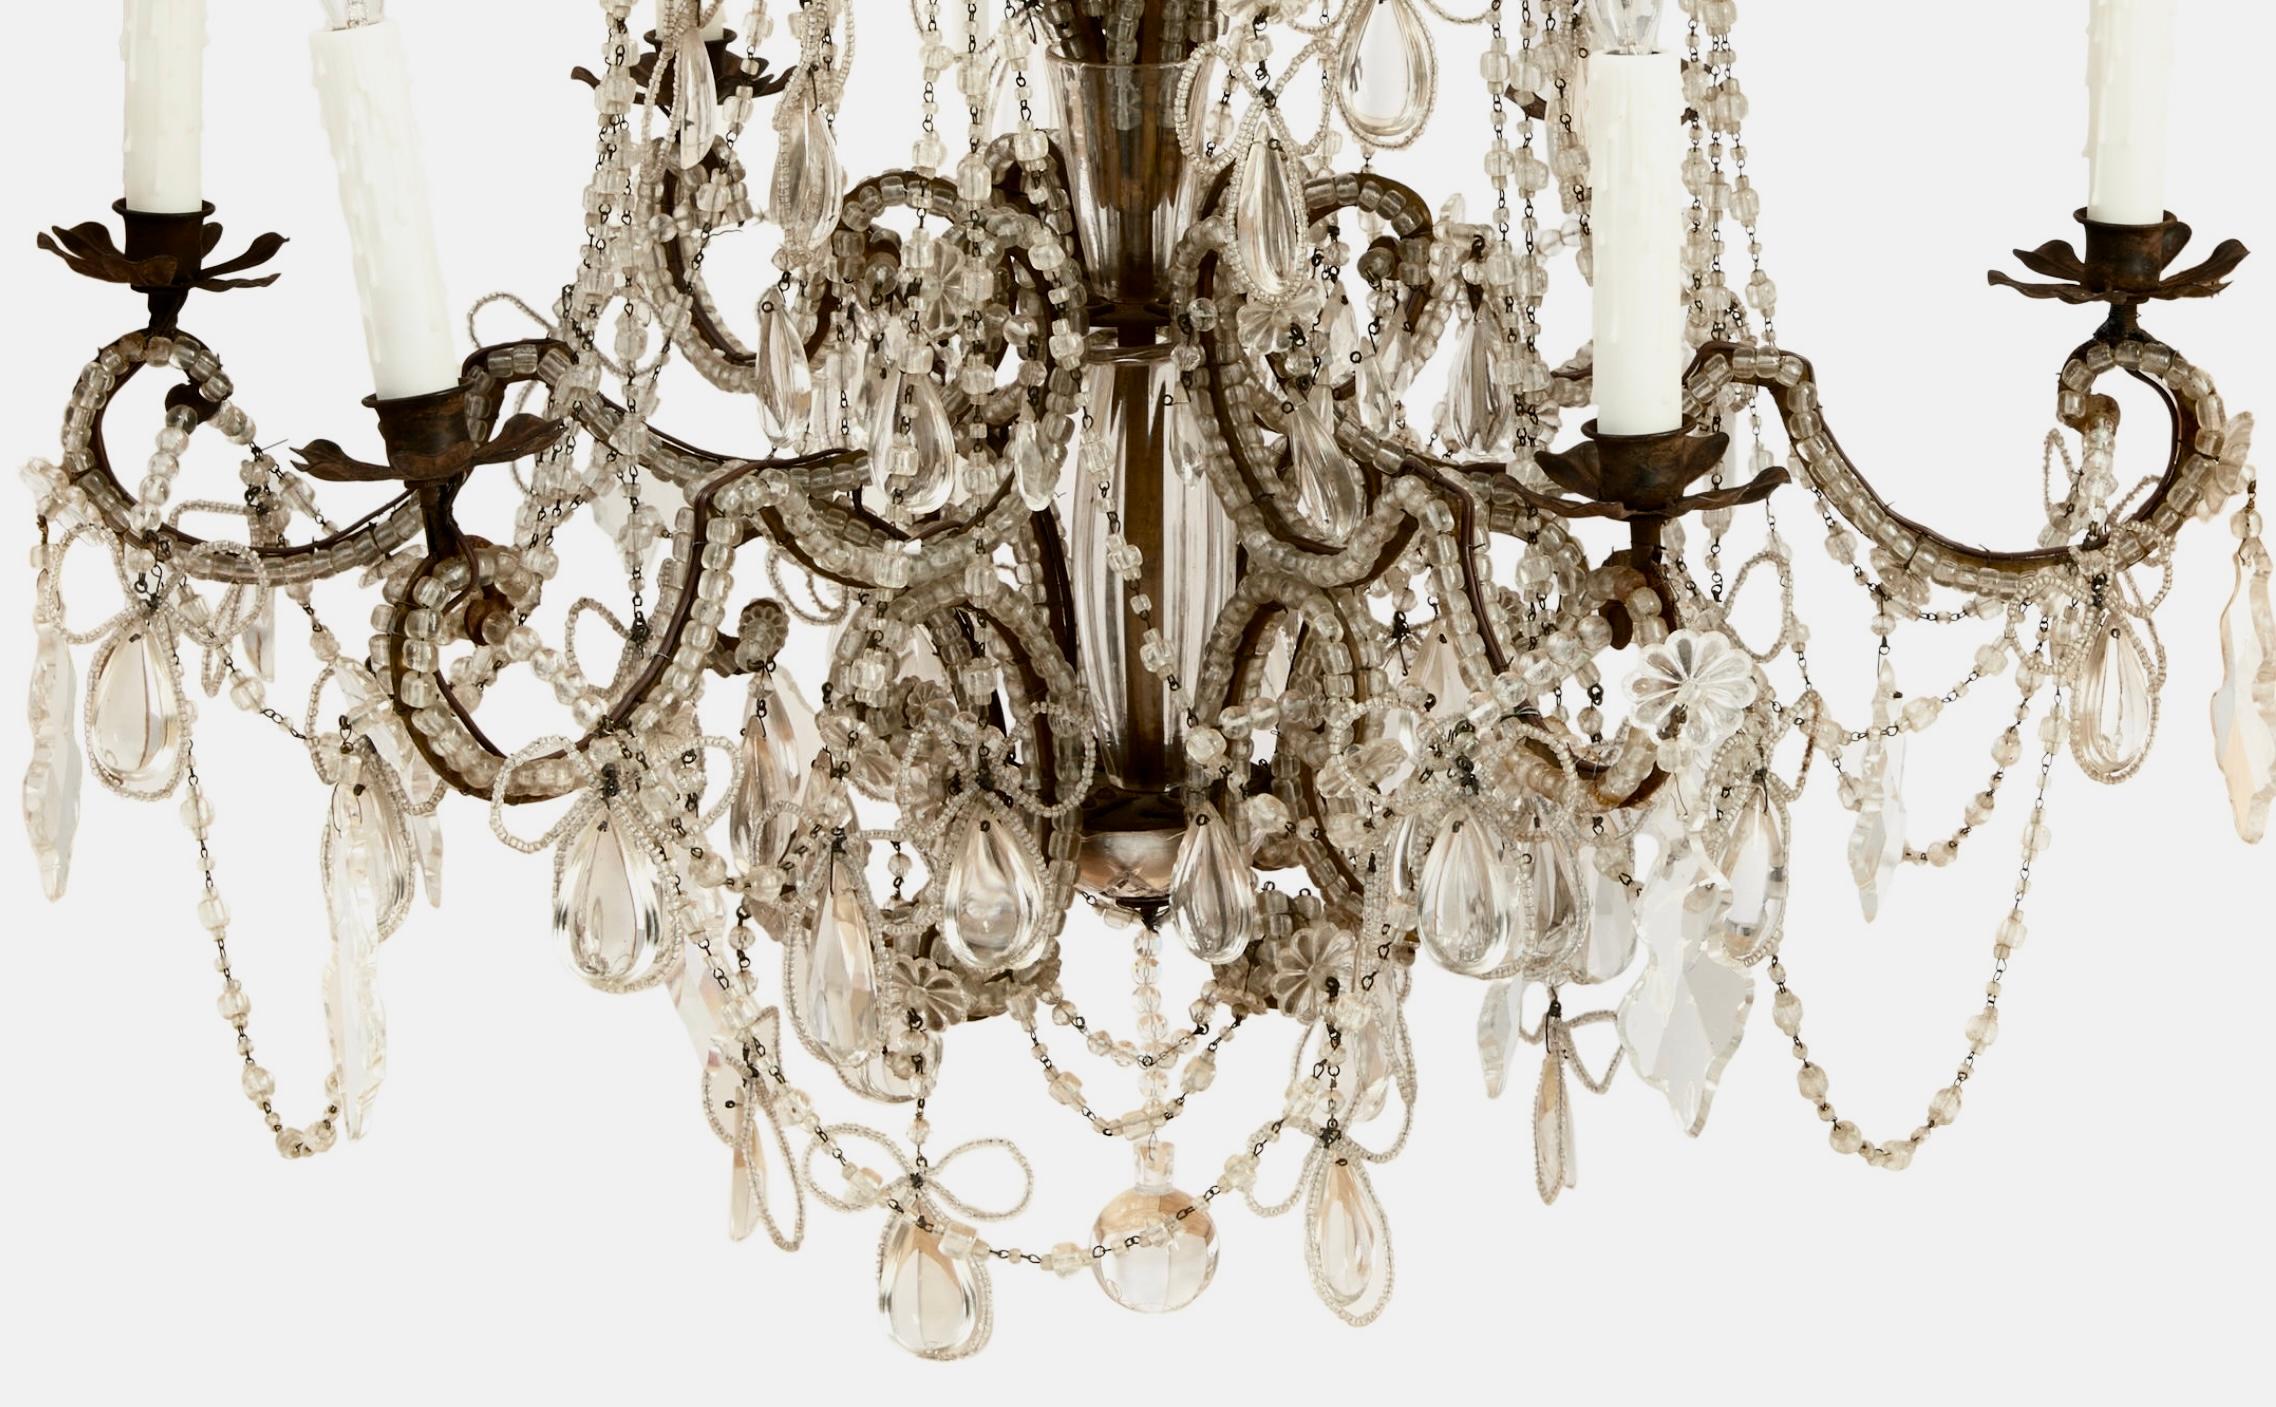 Large and stunning 19th century Italian beaded and crystal chandelier with six (6) lights. The lovely, curved base is covered in beads among a multitude of dangling prisms, some in the shape of clover with beaded bows and ribbons throughout. This